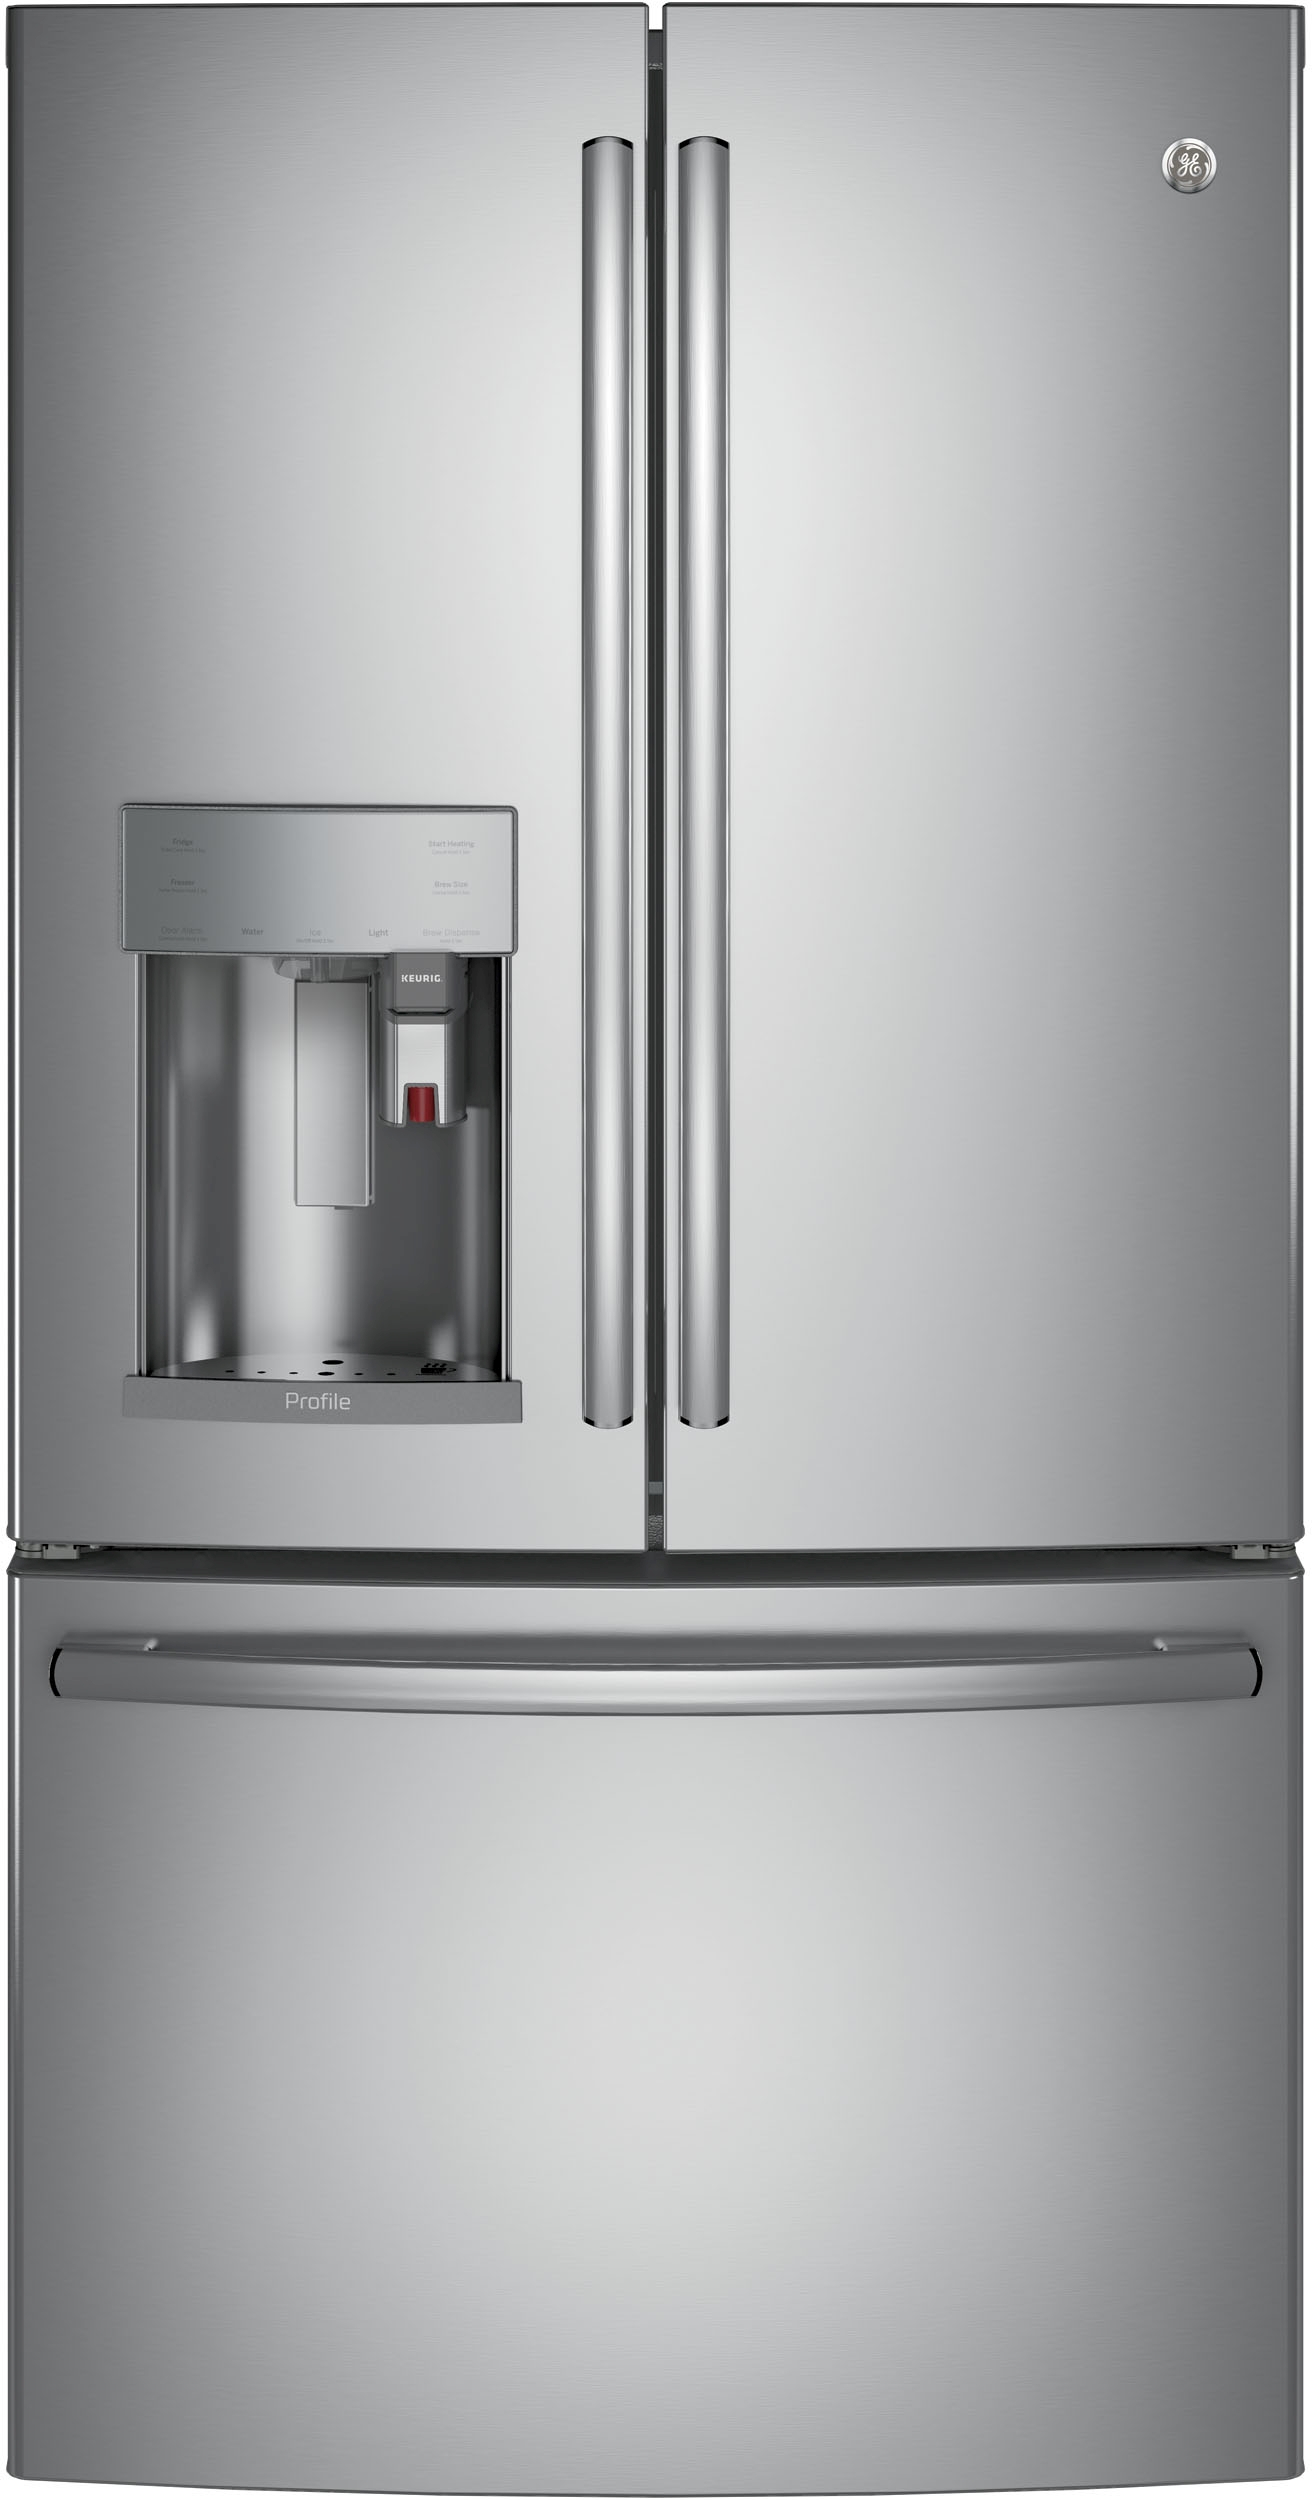 GE Profile™ 22.2 Cu. Ft. Stainless Steel Counter Depth French Door Refrigerator